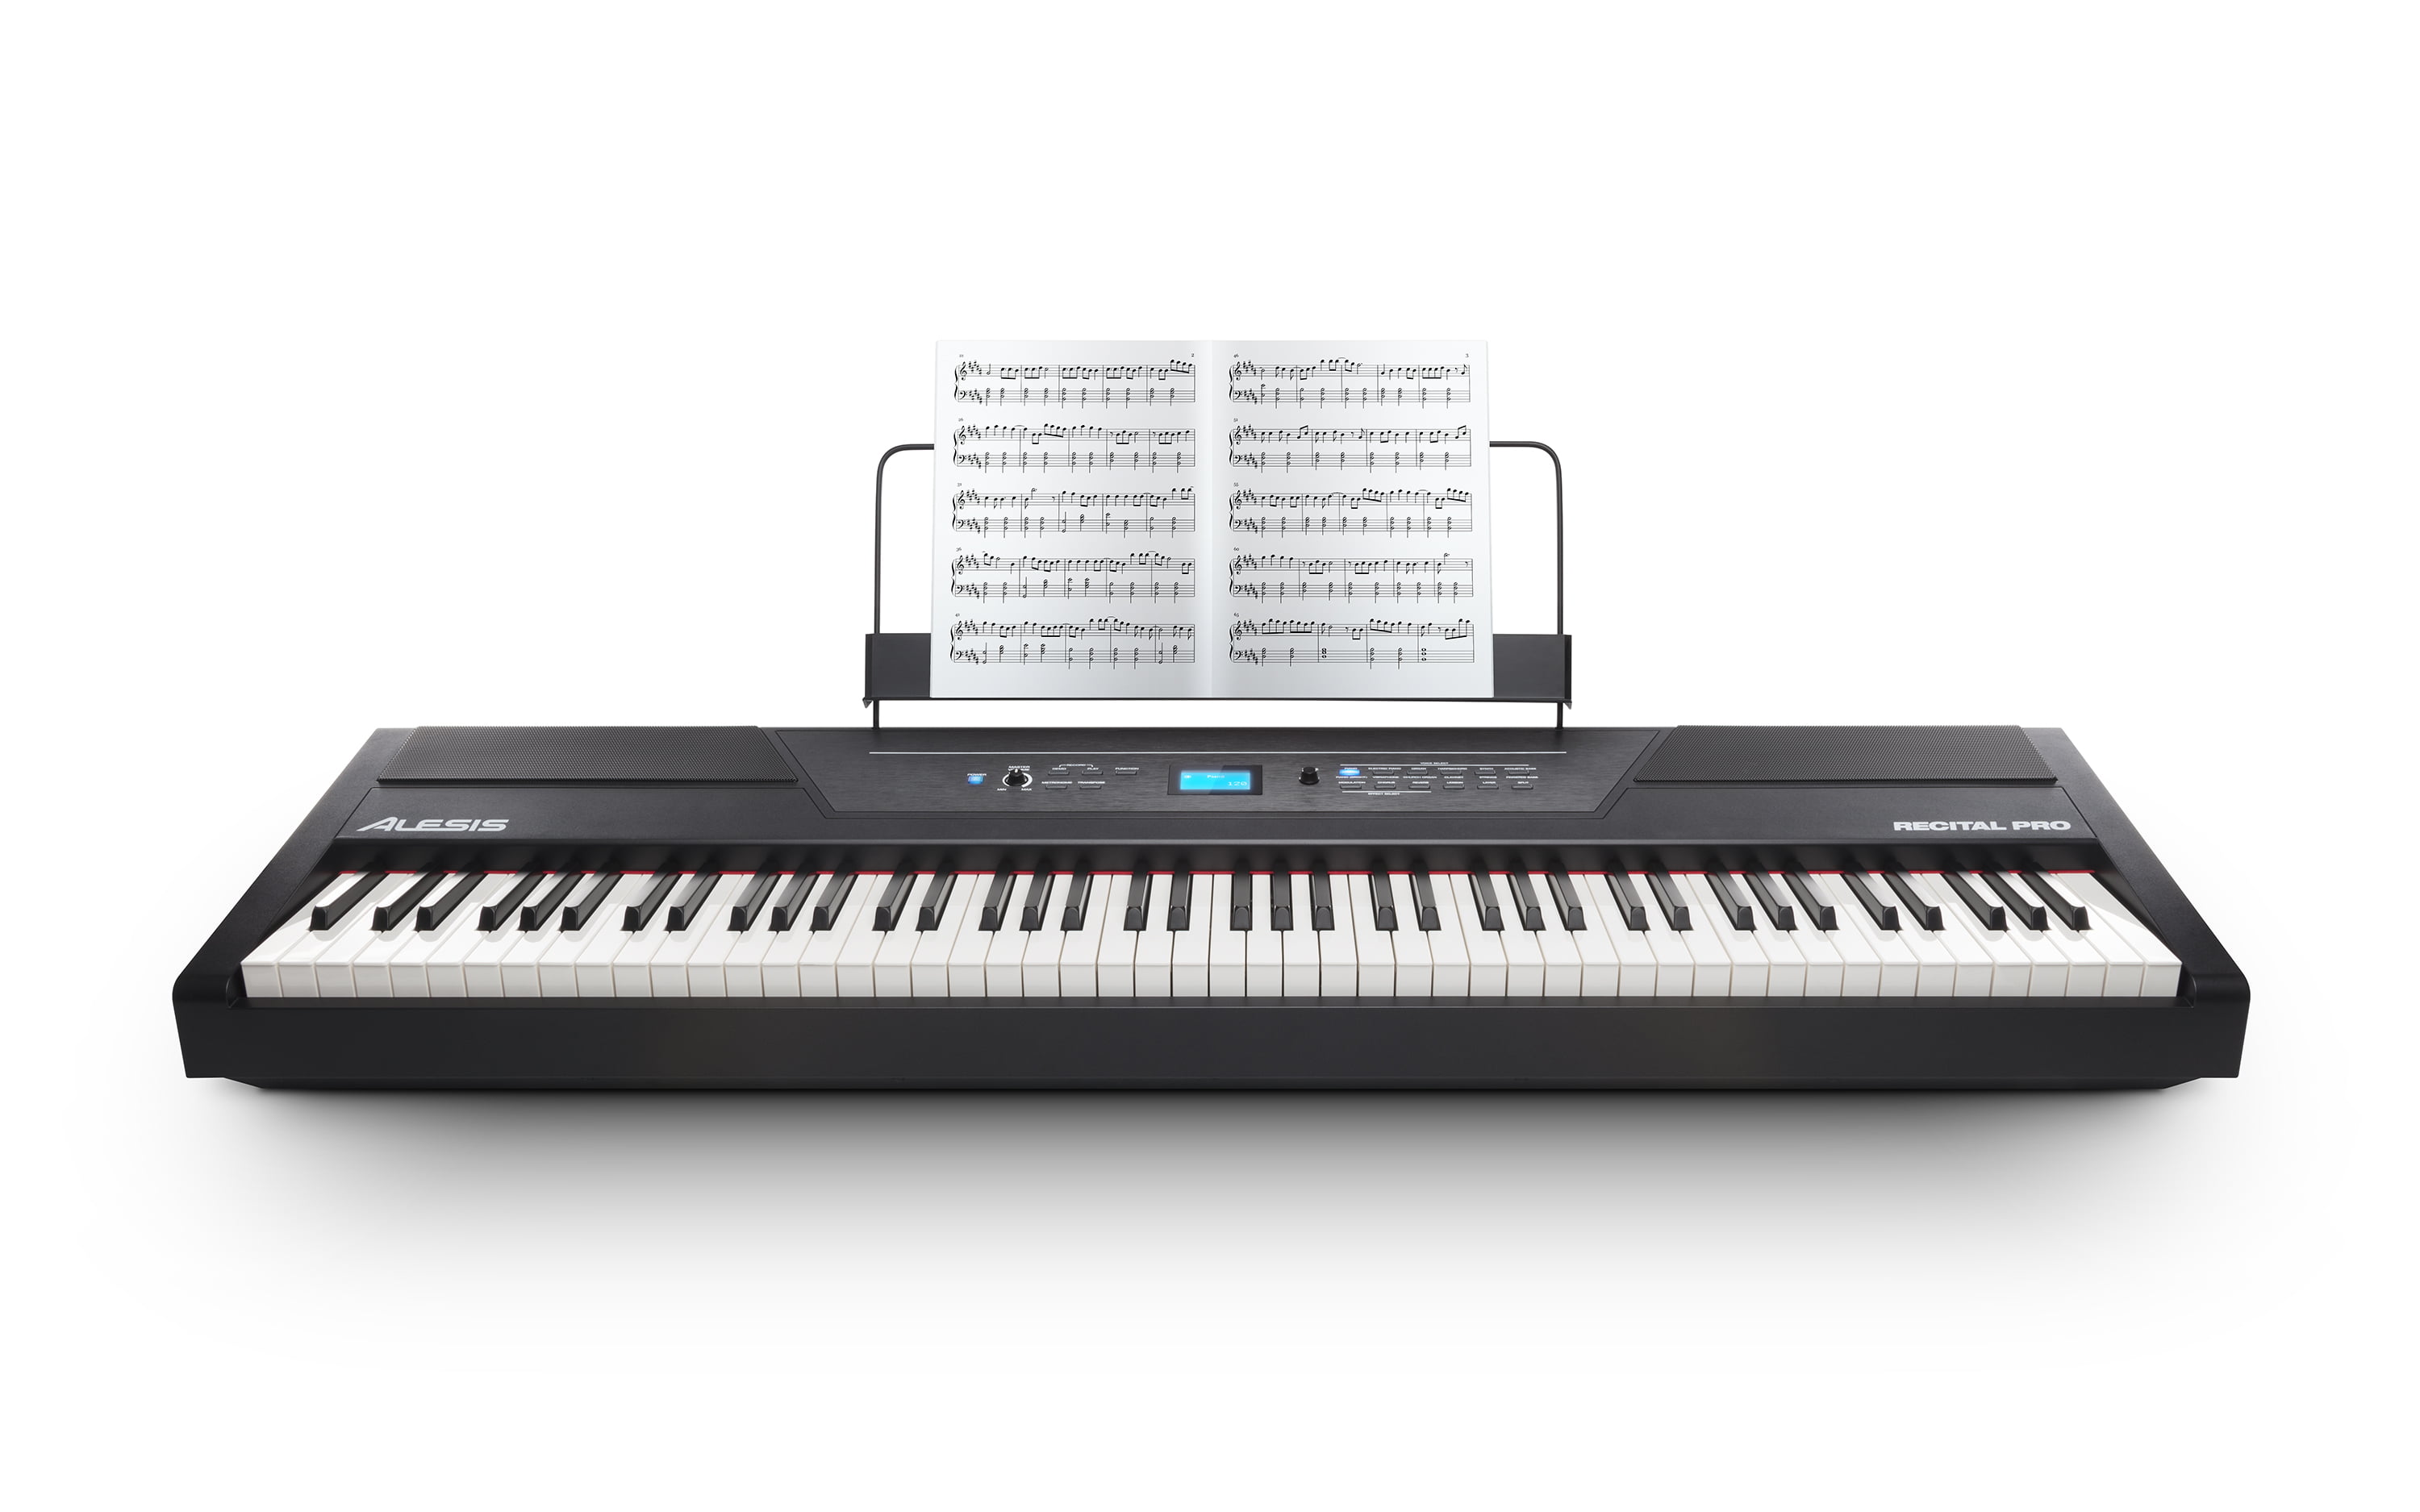 Alesis New Alesis 88 Keyboard Weighted Hammer Action Recital Pro Keyboard  From Japan 